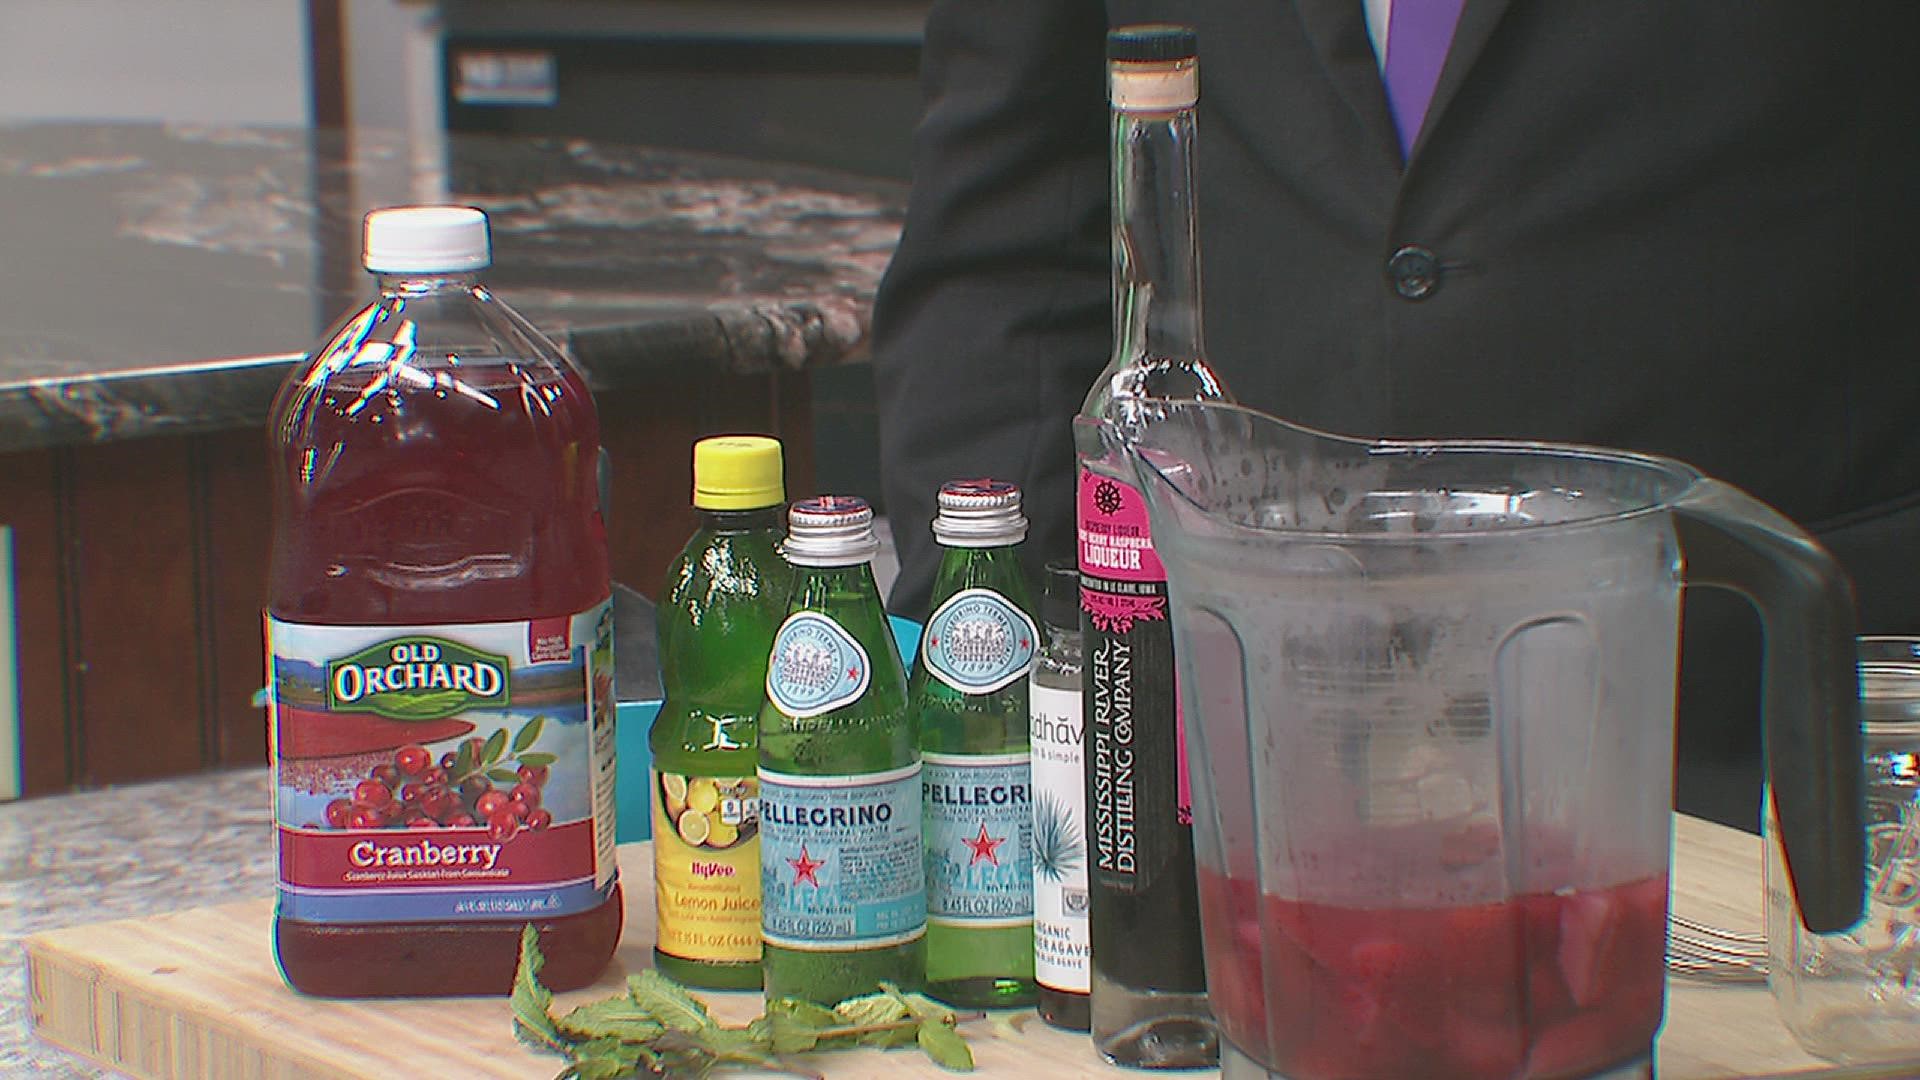 News 8's David Bohlman and Andrew Stutzke make strawberry spritzer on GMQC at 11 on Friday, June 17.